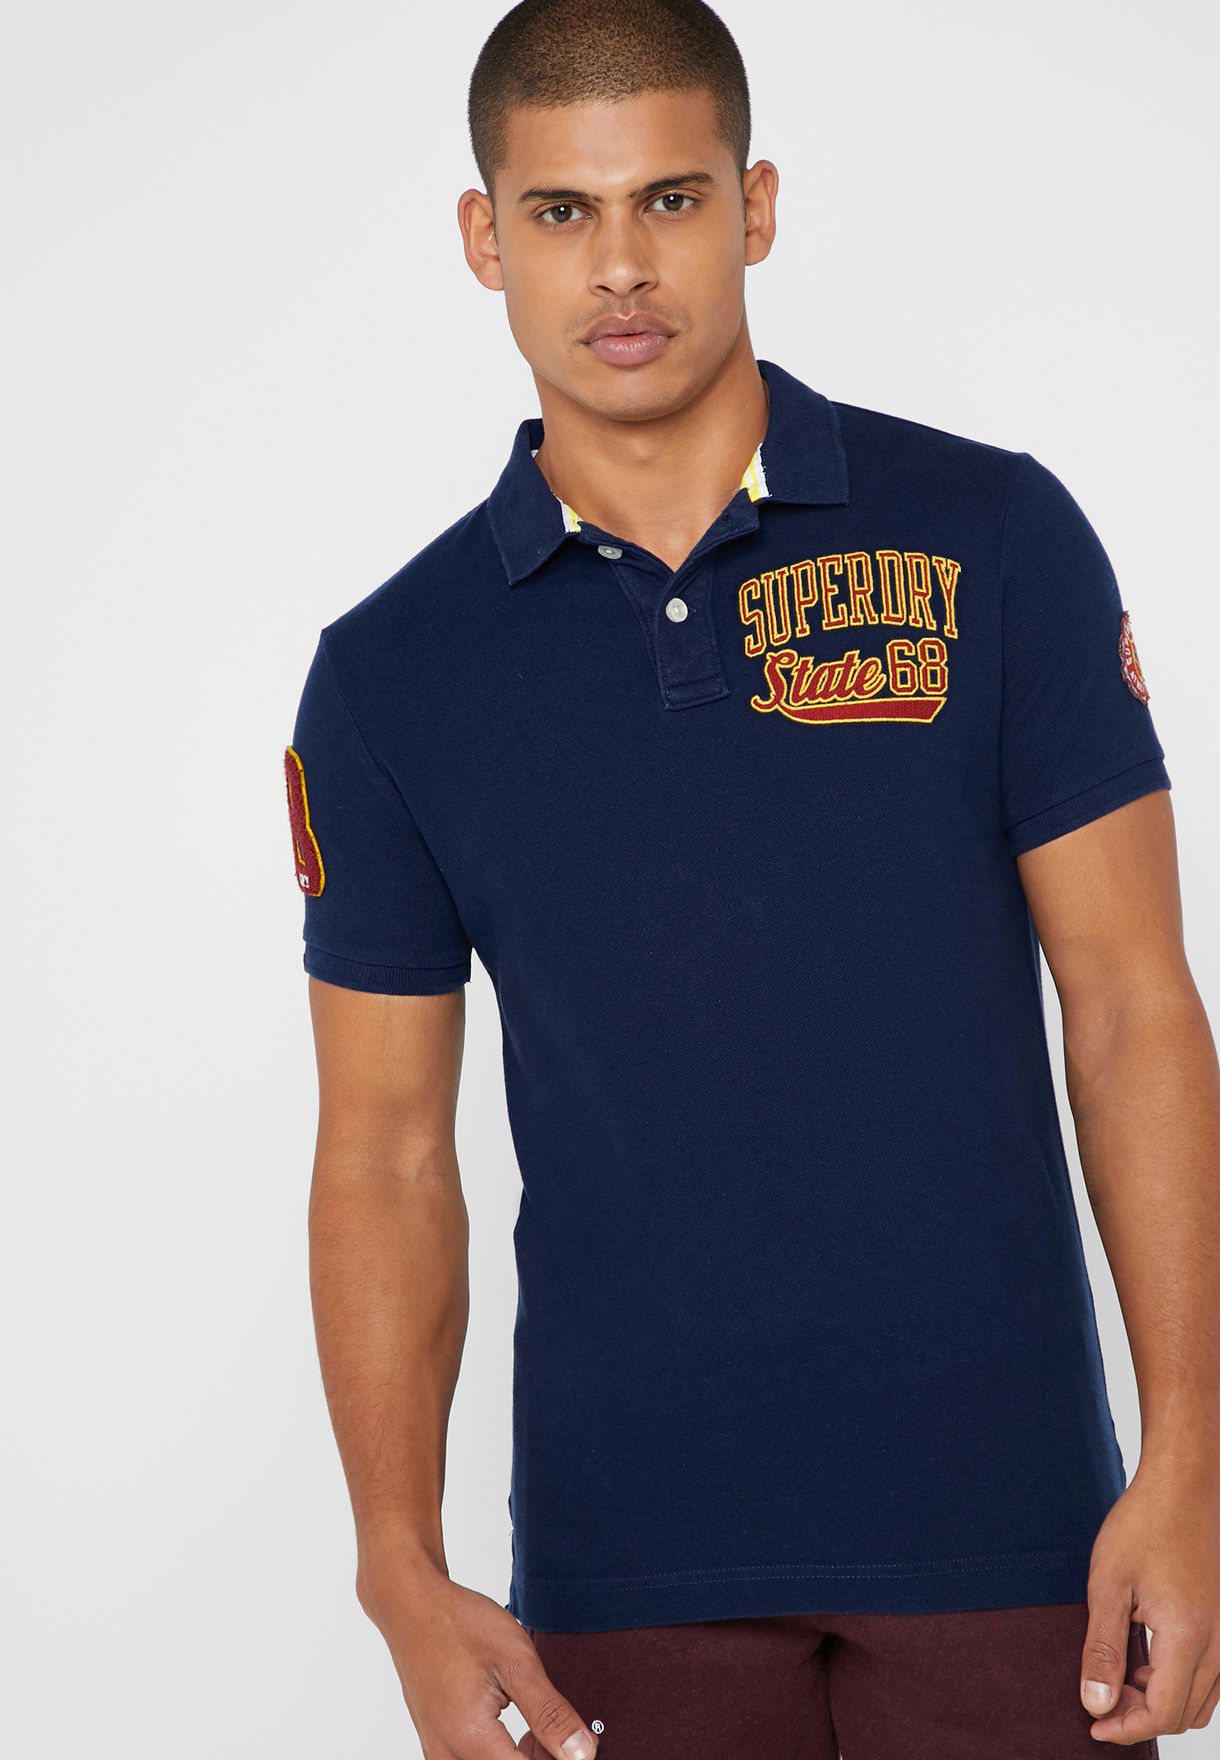 Buy Superdry Classic Superstate Polo Men MENA, Worldwide